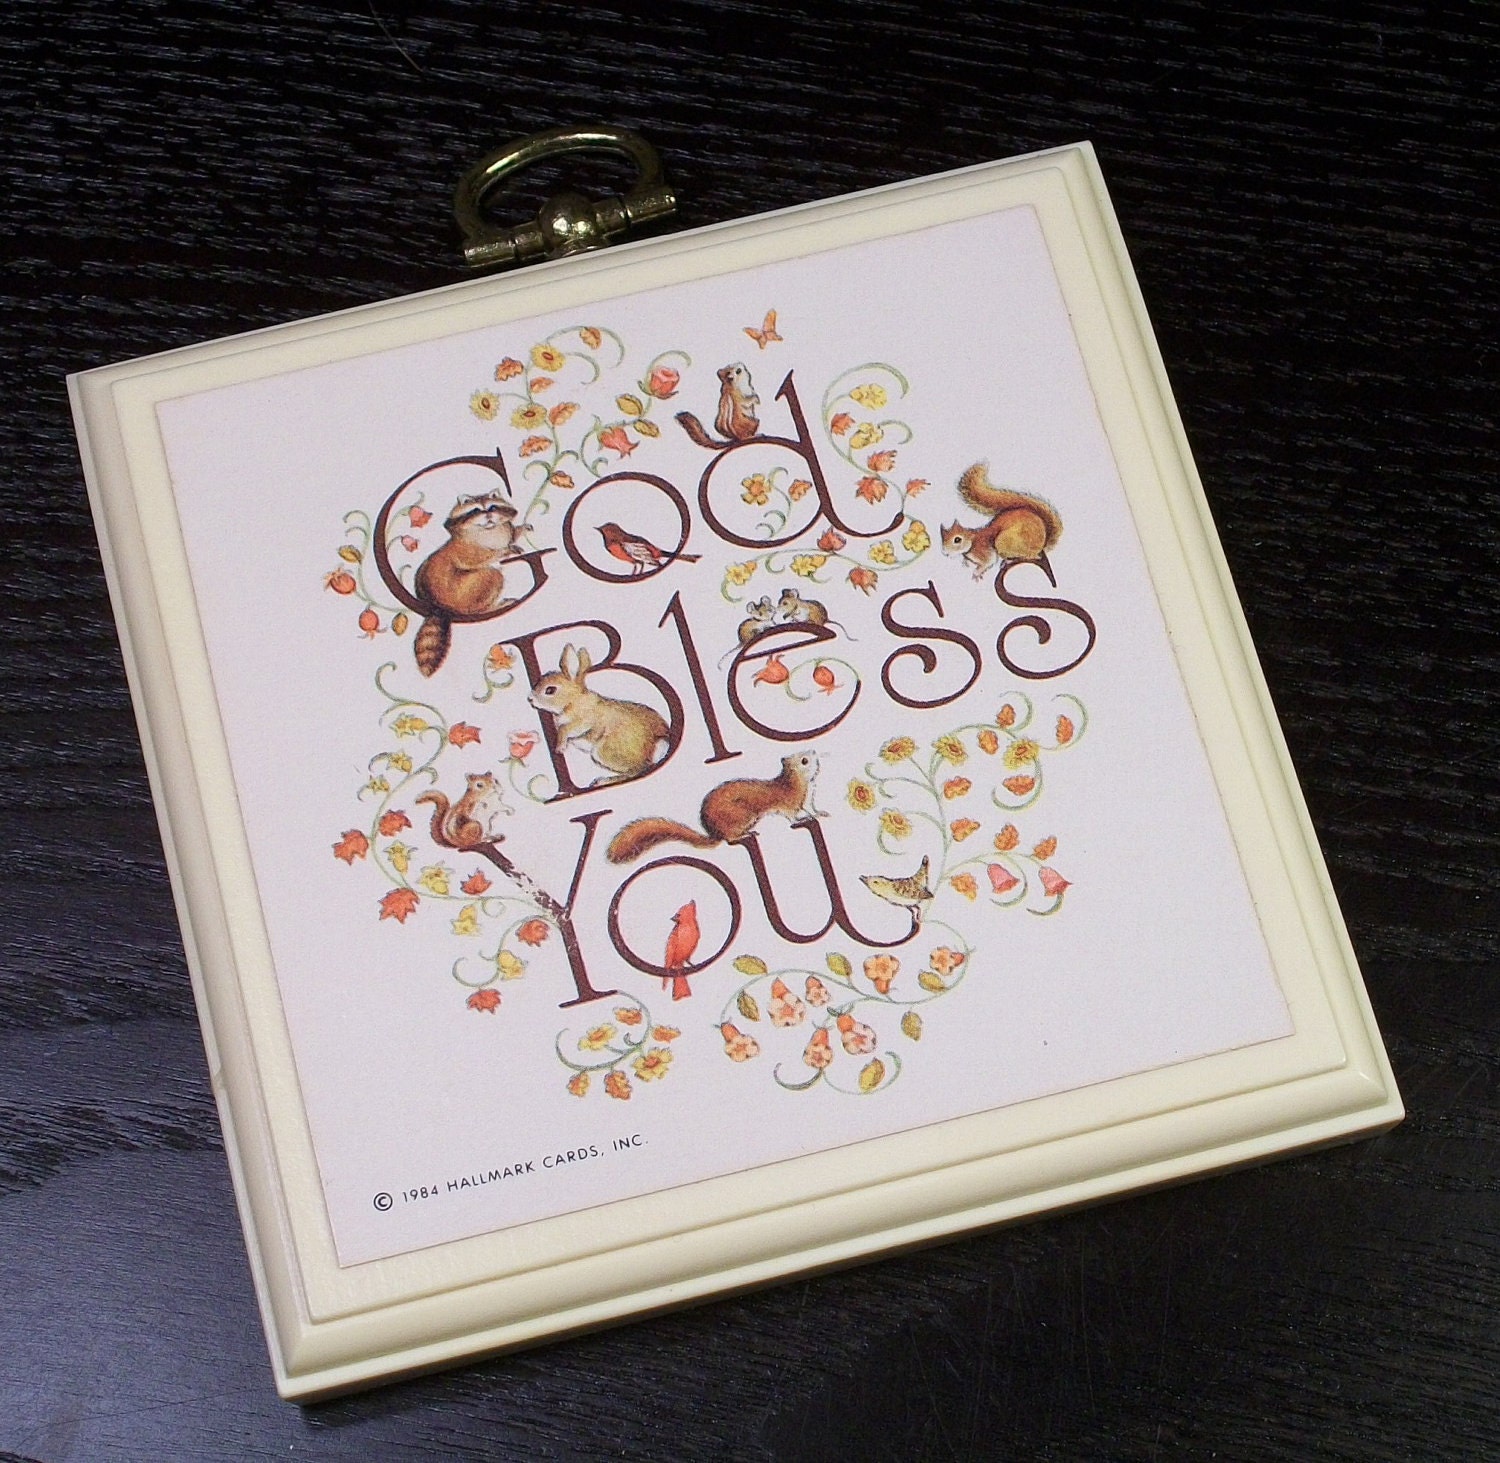 Vintage Hallmark Mini Plaque "God Bless You" Cream Forest Animals Leaves Flowers1980's